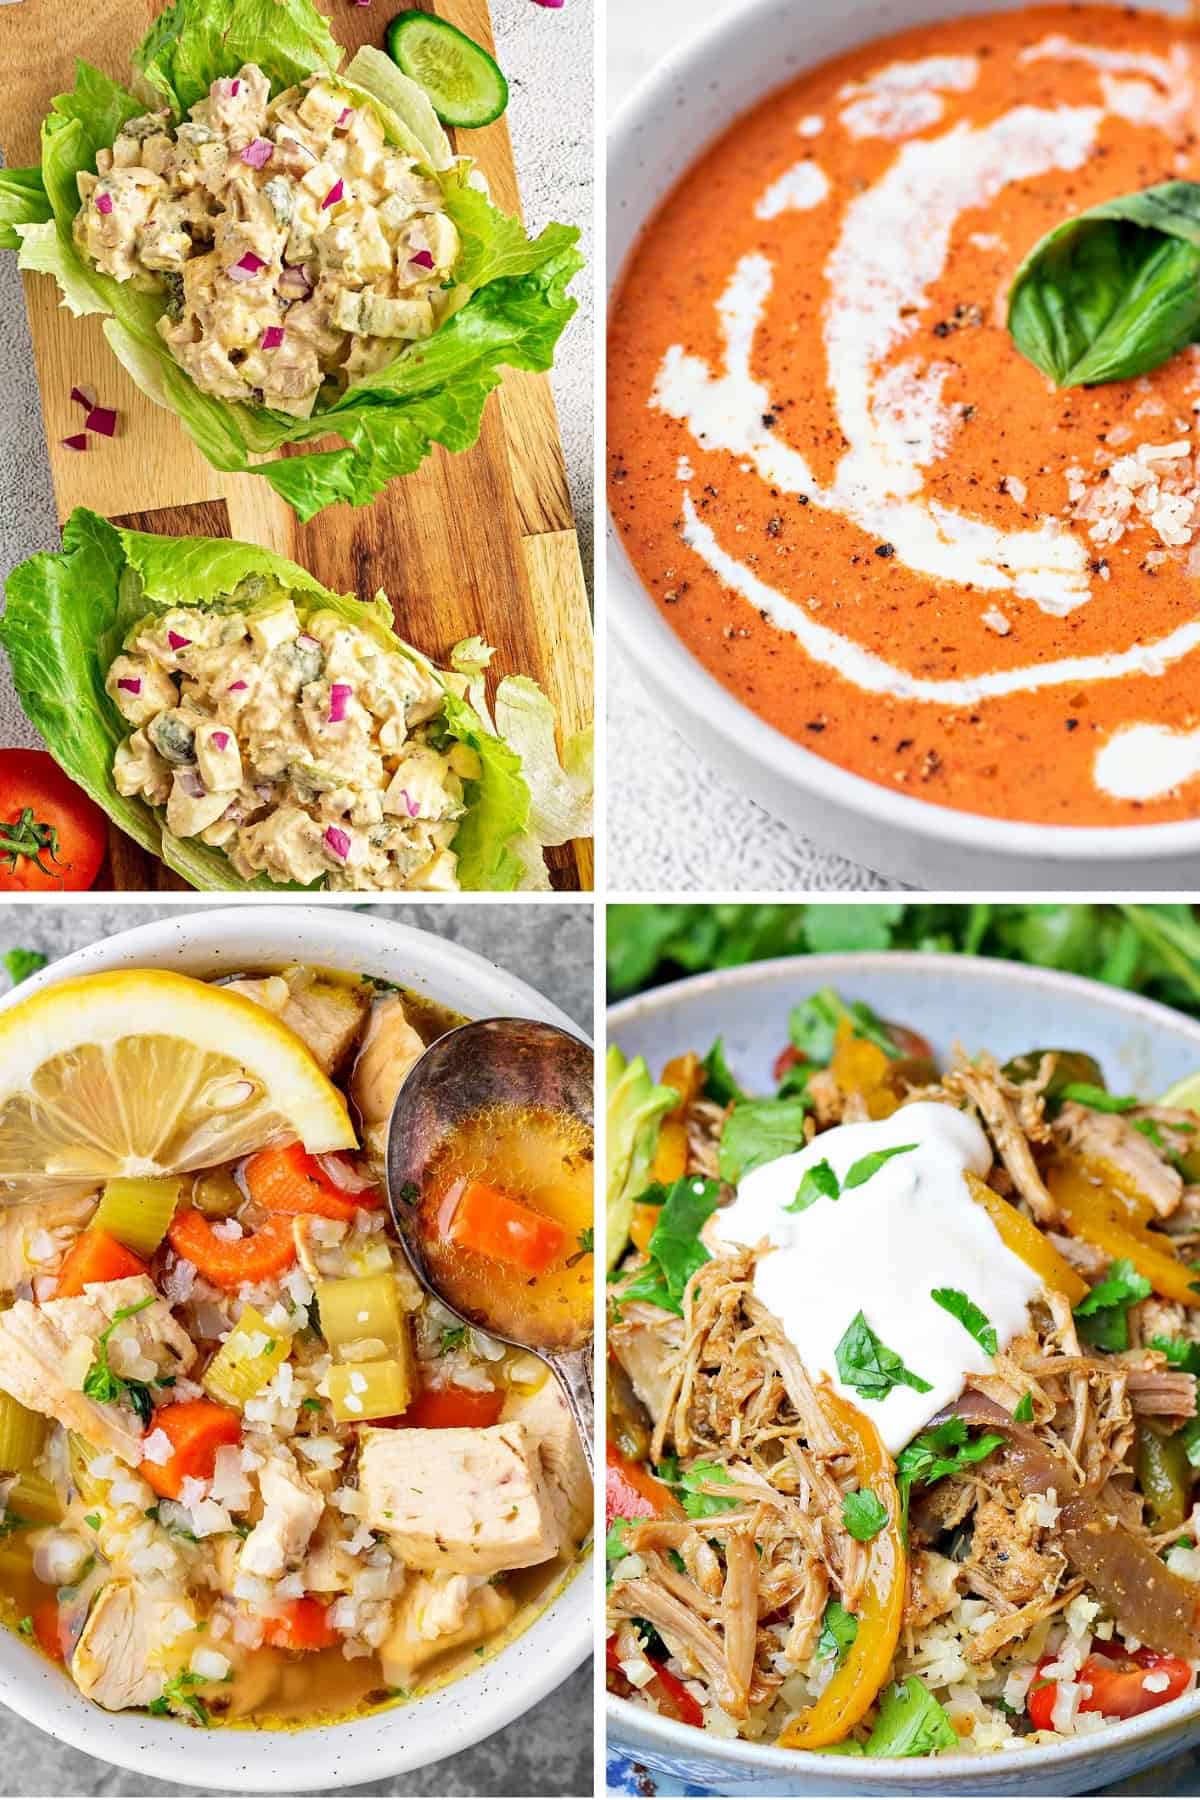 low carb lunch ideas like salad, wraps, bowls, and soups